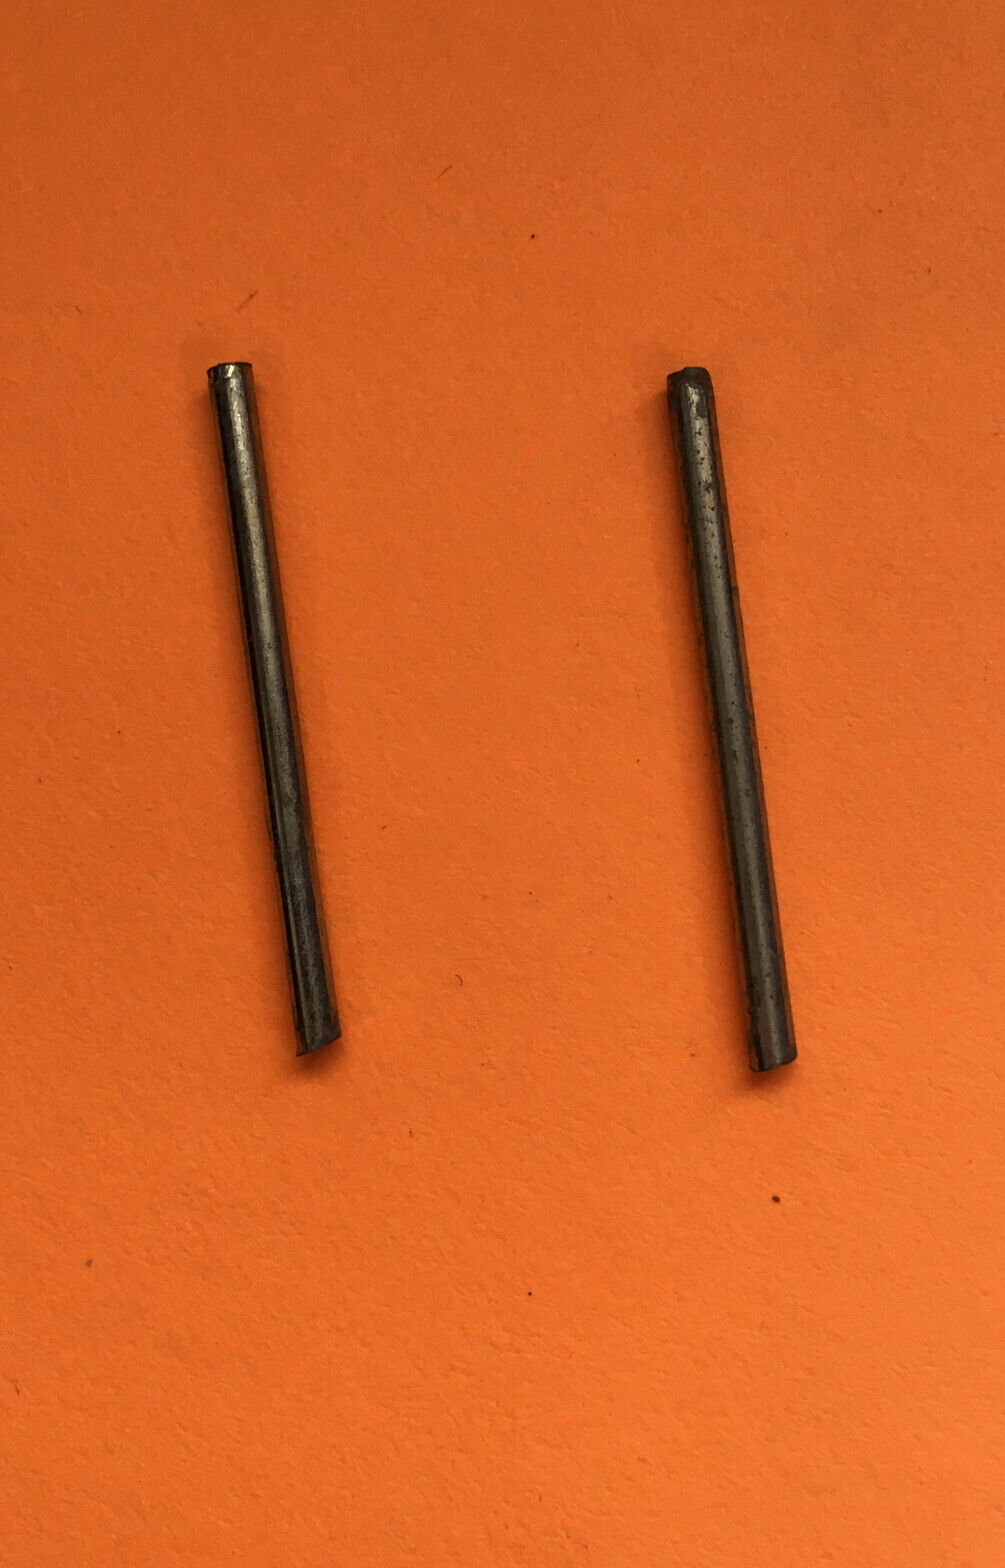 *NOS* 540684-SINGER-TENSION RELEASING PIN-(LOT OF 2) FOR SEWING MACHINES* SINGER 540684